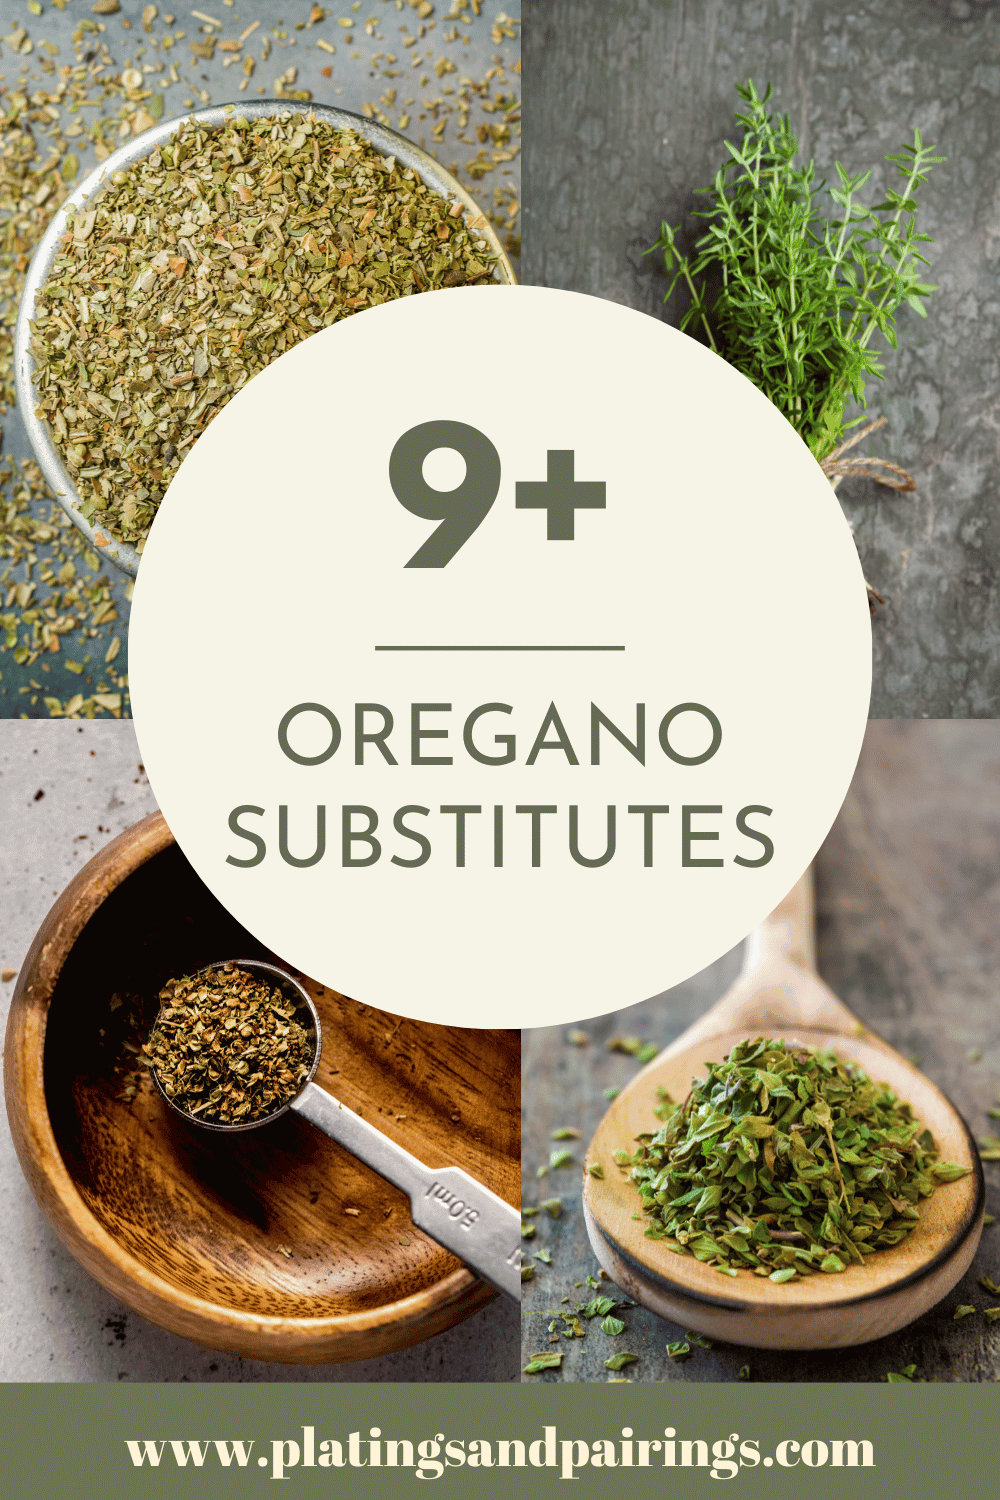 Collage of oregano substitutes with text overlay.